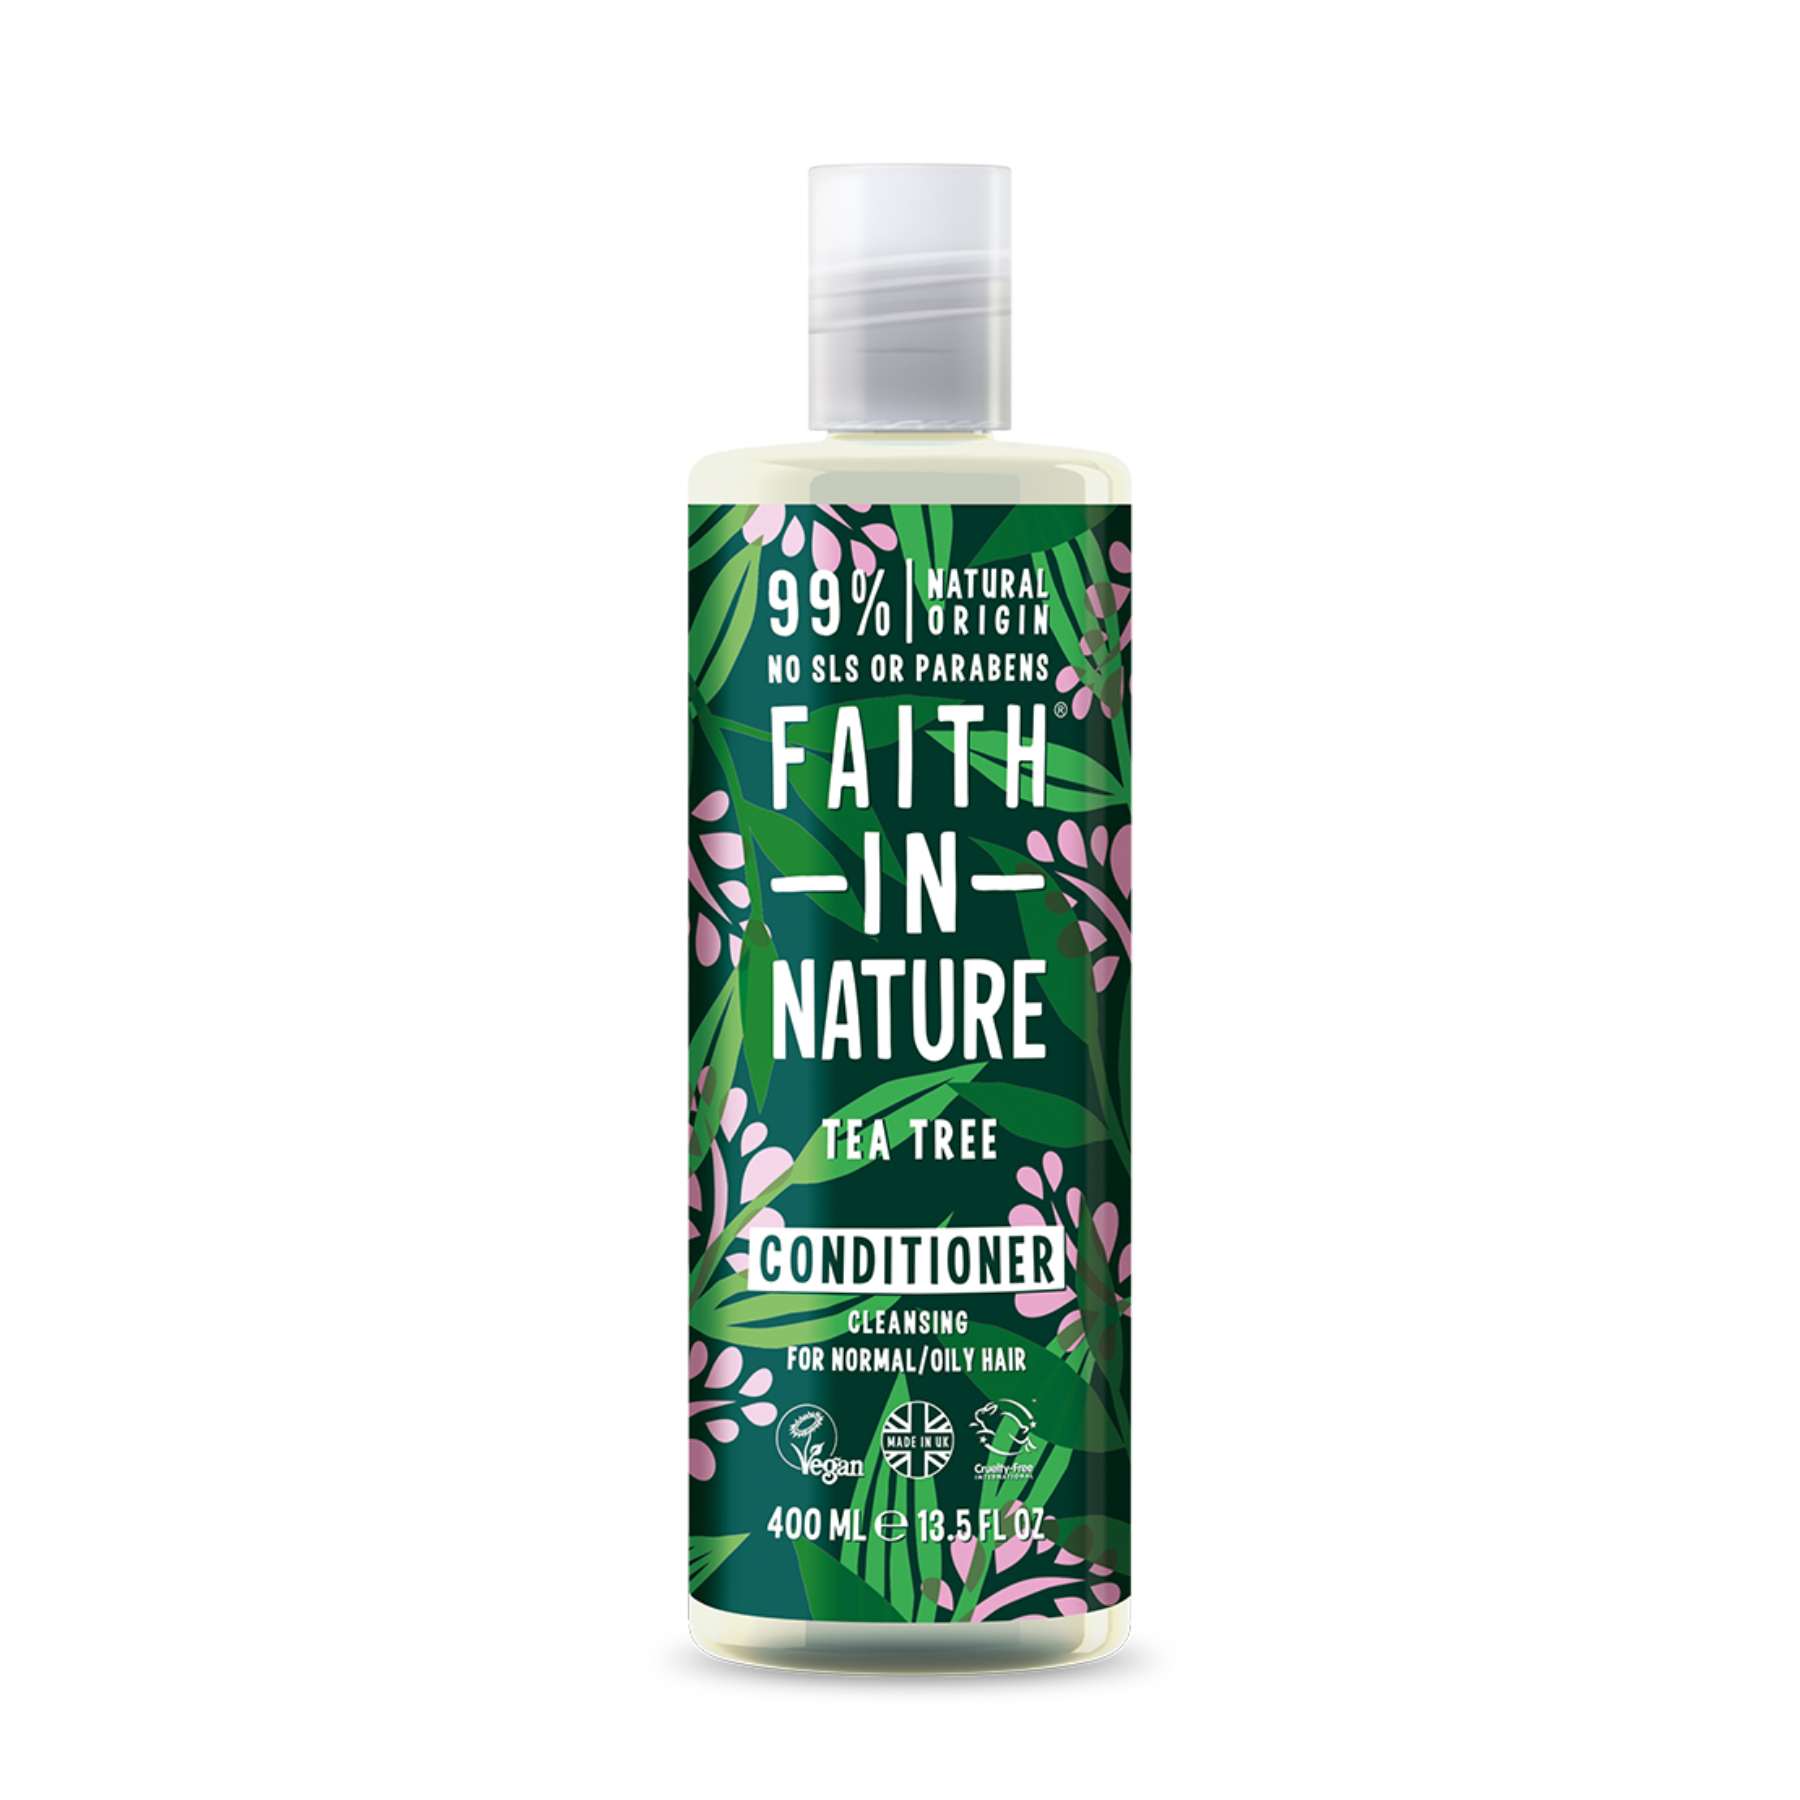  Shop Faith In Nature Tea Tree Conditioner 400 ml | Oily Scalp on Sublime Life. Fights Greasy Scalp. Suitable for Normal to Oily Hair